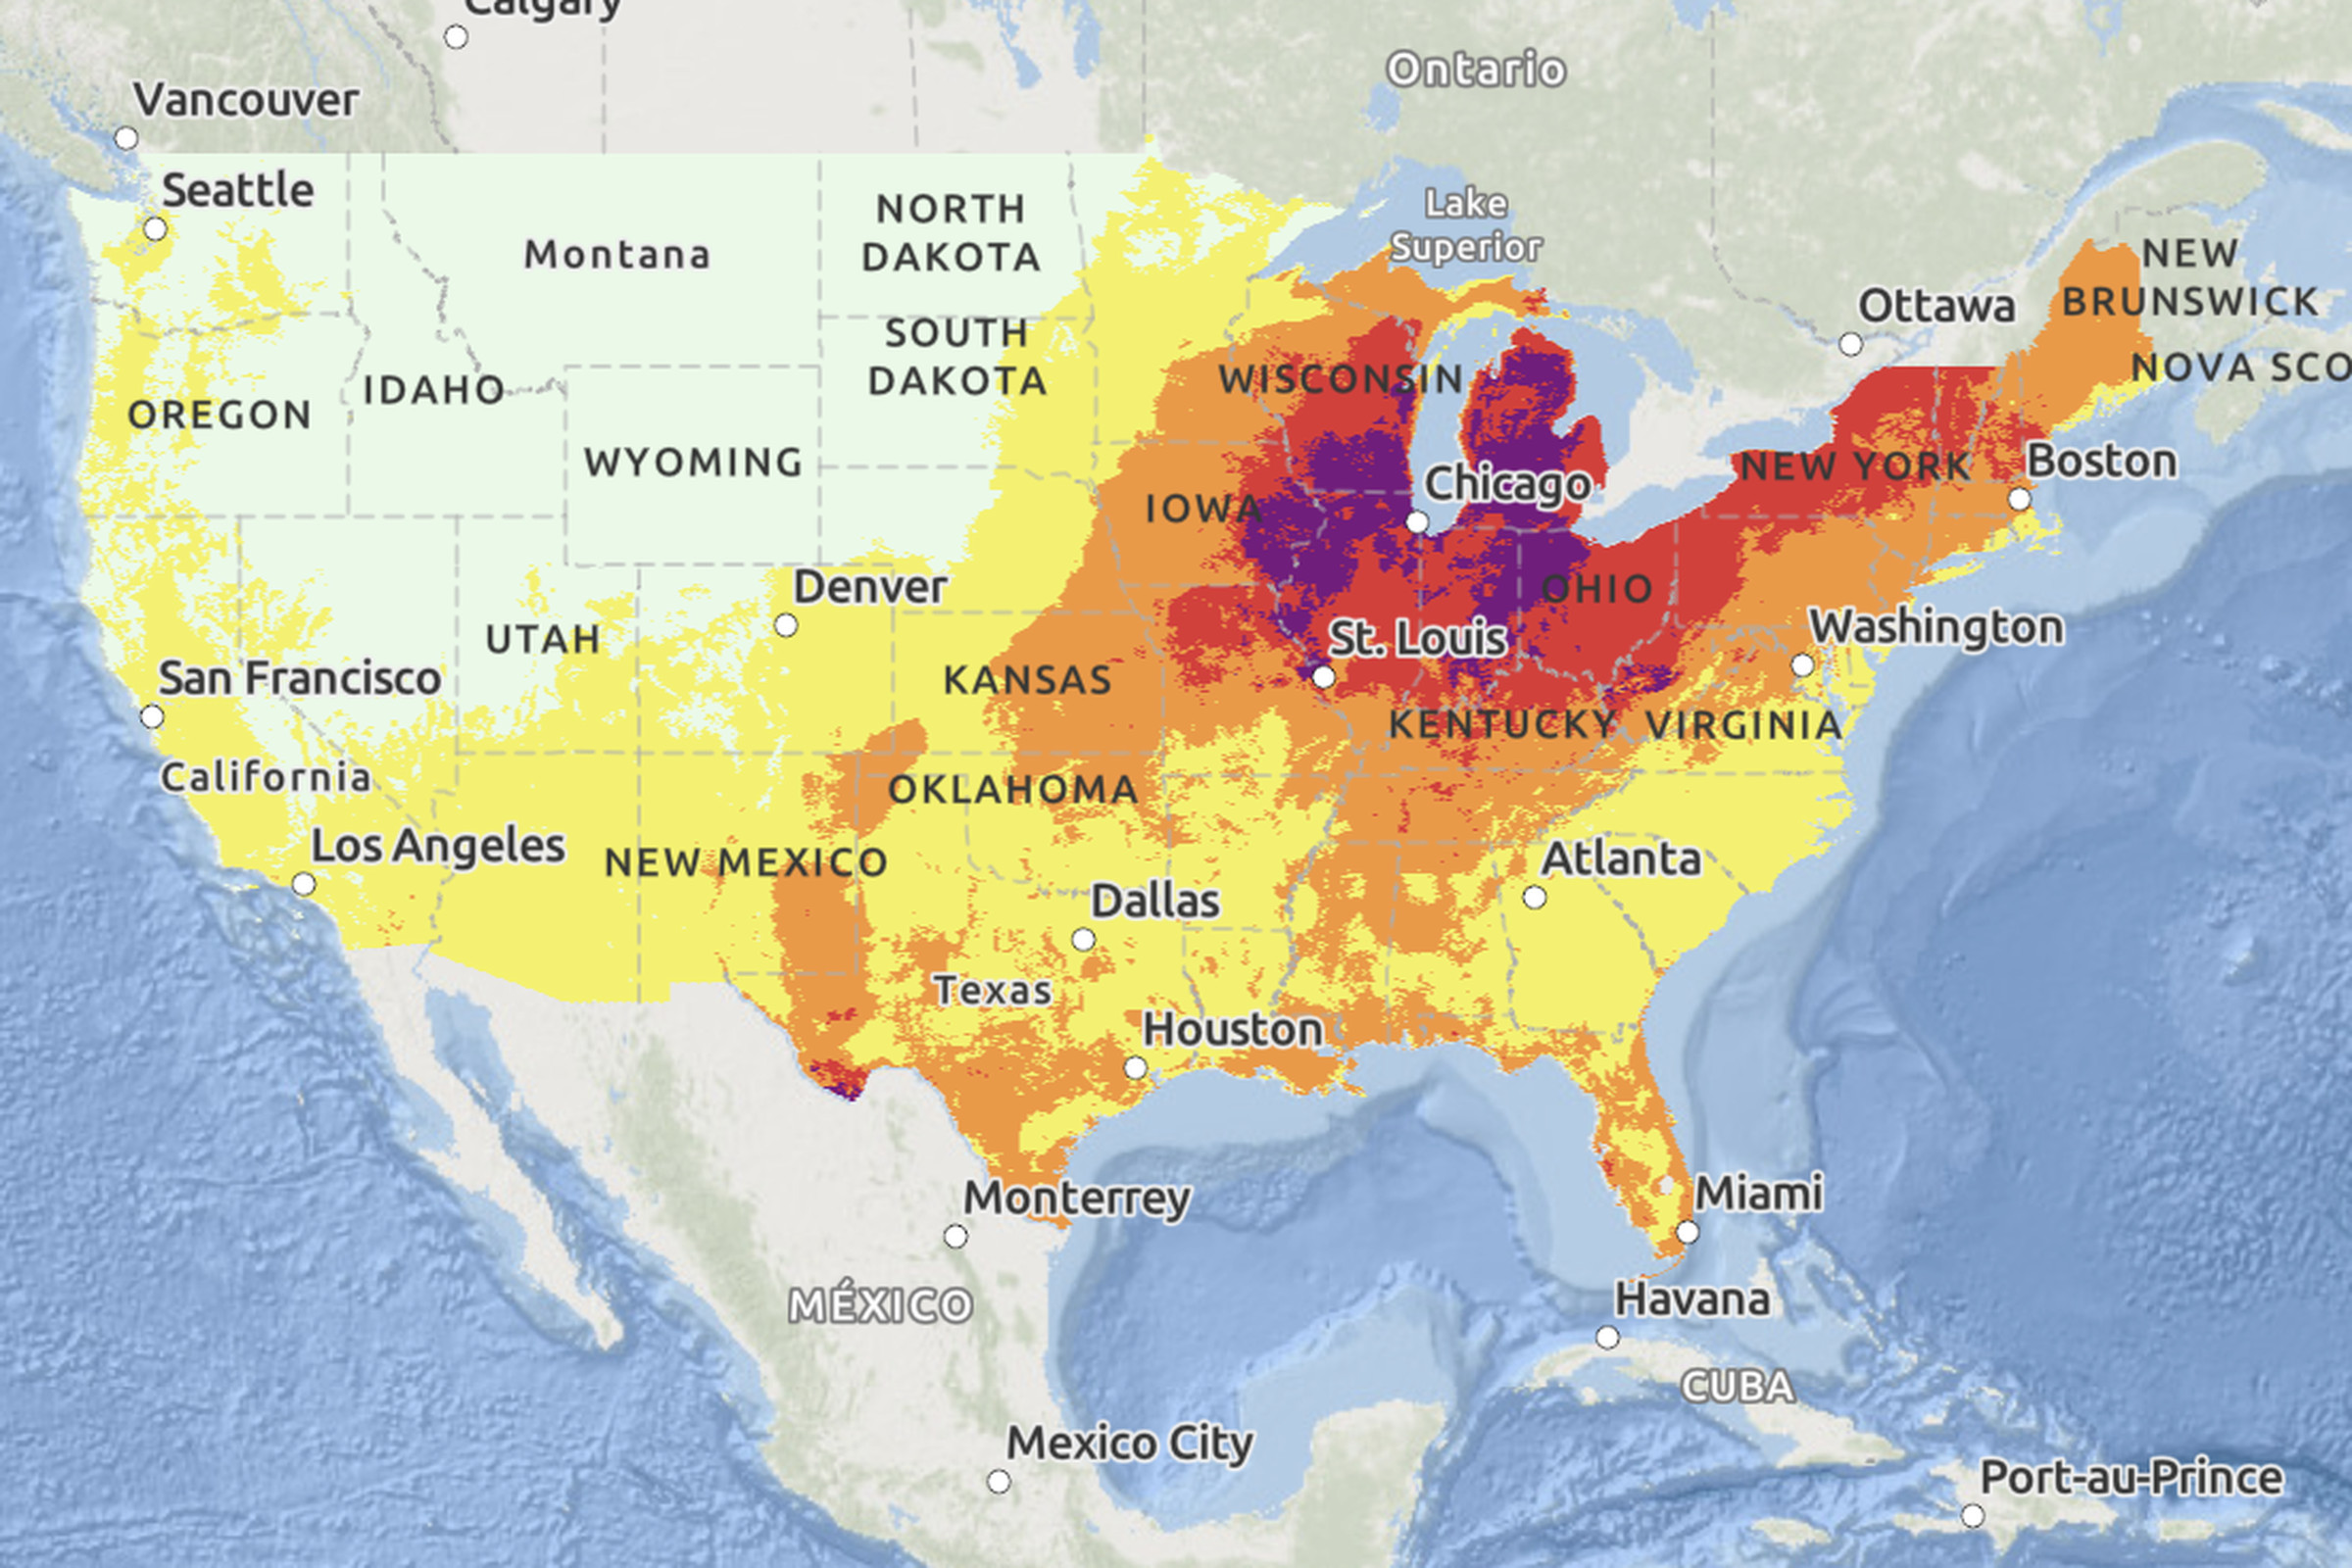 A map of the US colored in yellow, orange, red, and magenta to indicate areas facing health risks related to extreme heat.